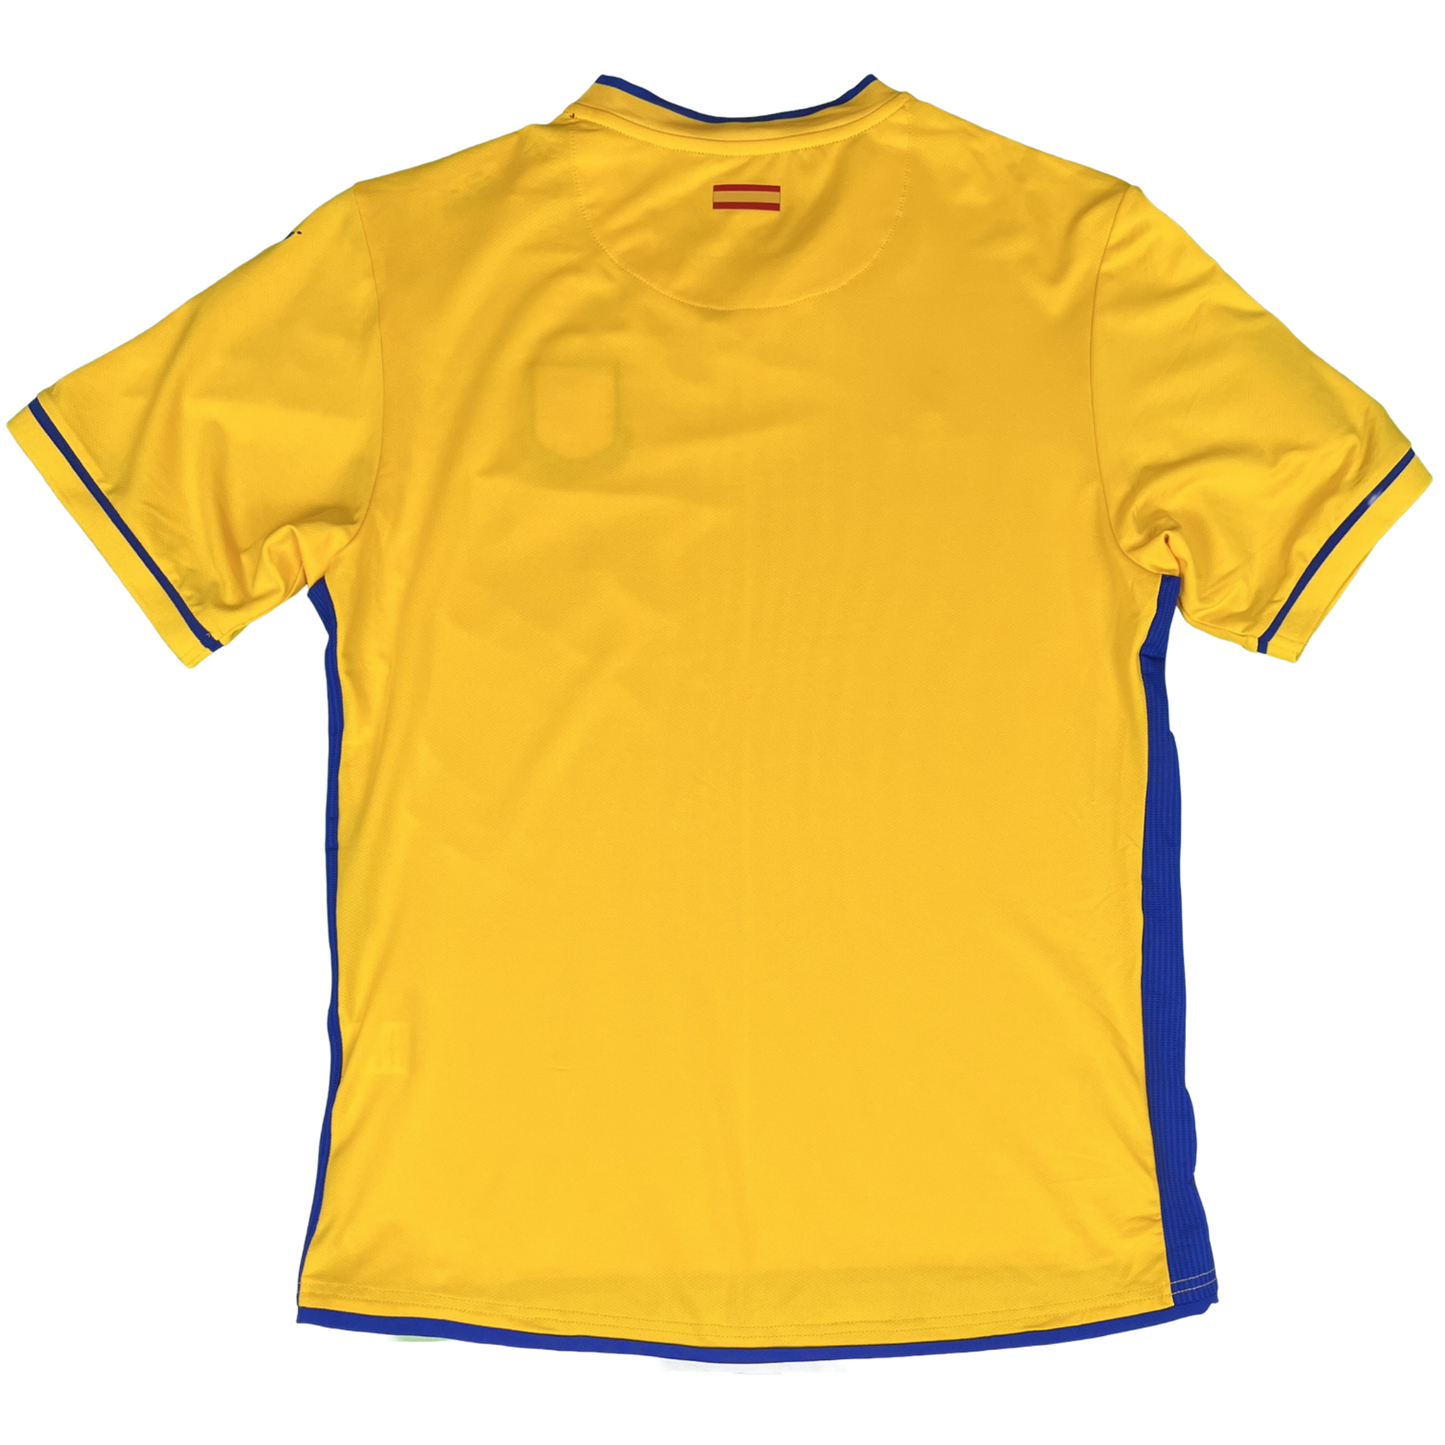 2019/2020 AD Alcorcon Home Shirt (8/10) M